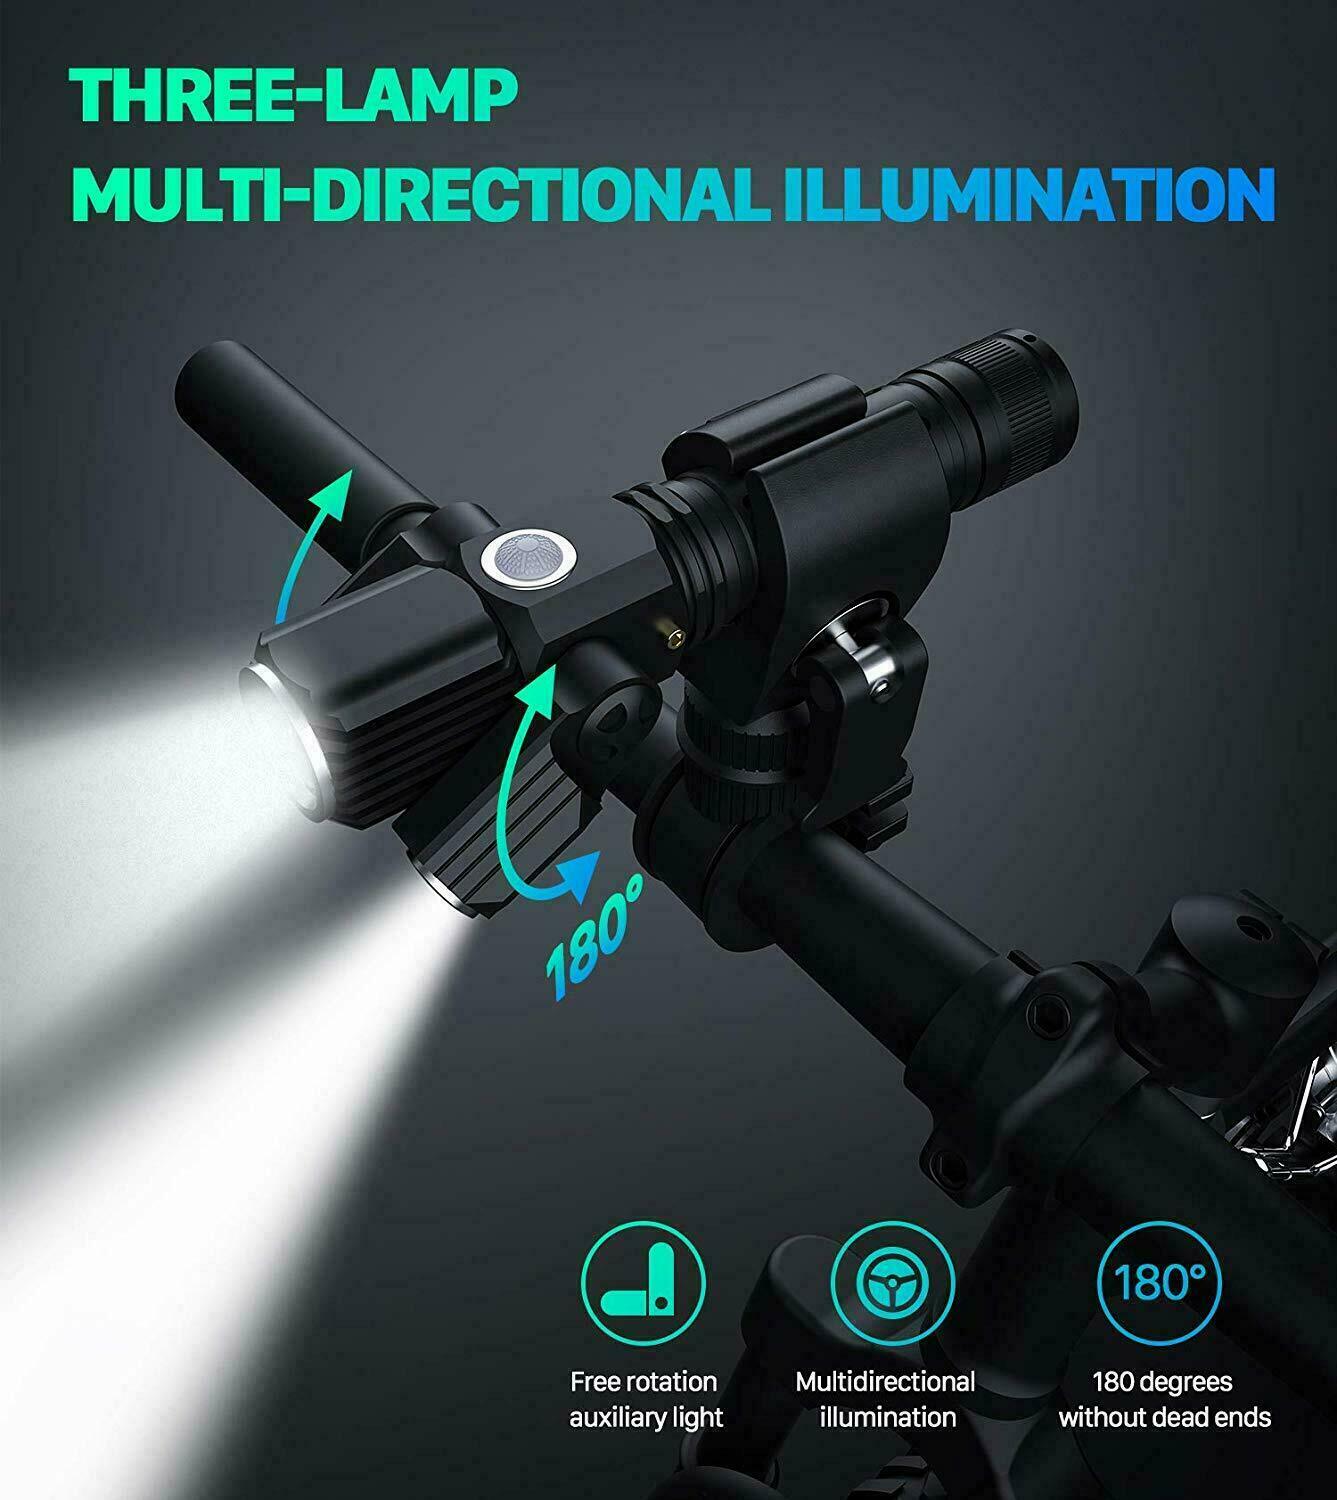 10000LM USB Rechargeable Bike Light Super Bright Bicycle Lights Headlight Front Light IPX5 Waterproof - Riding Cycling Camping - image 2 of 8